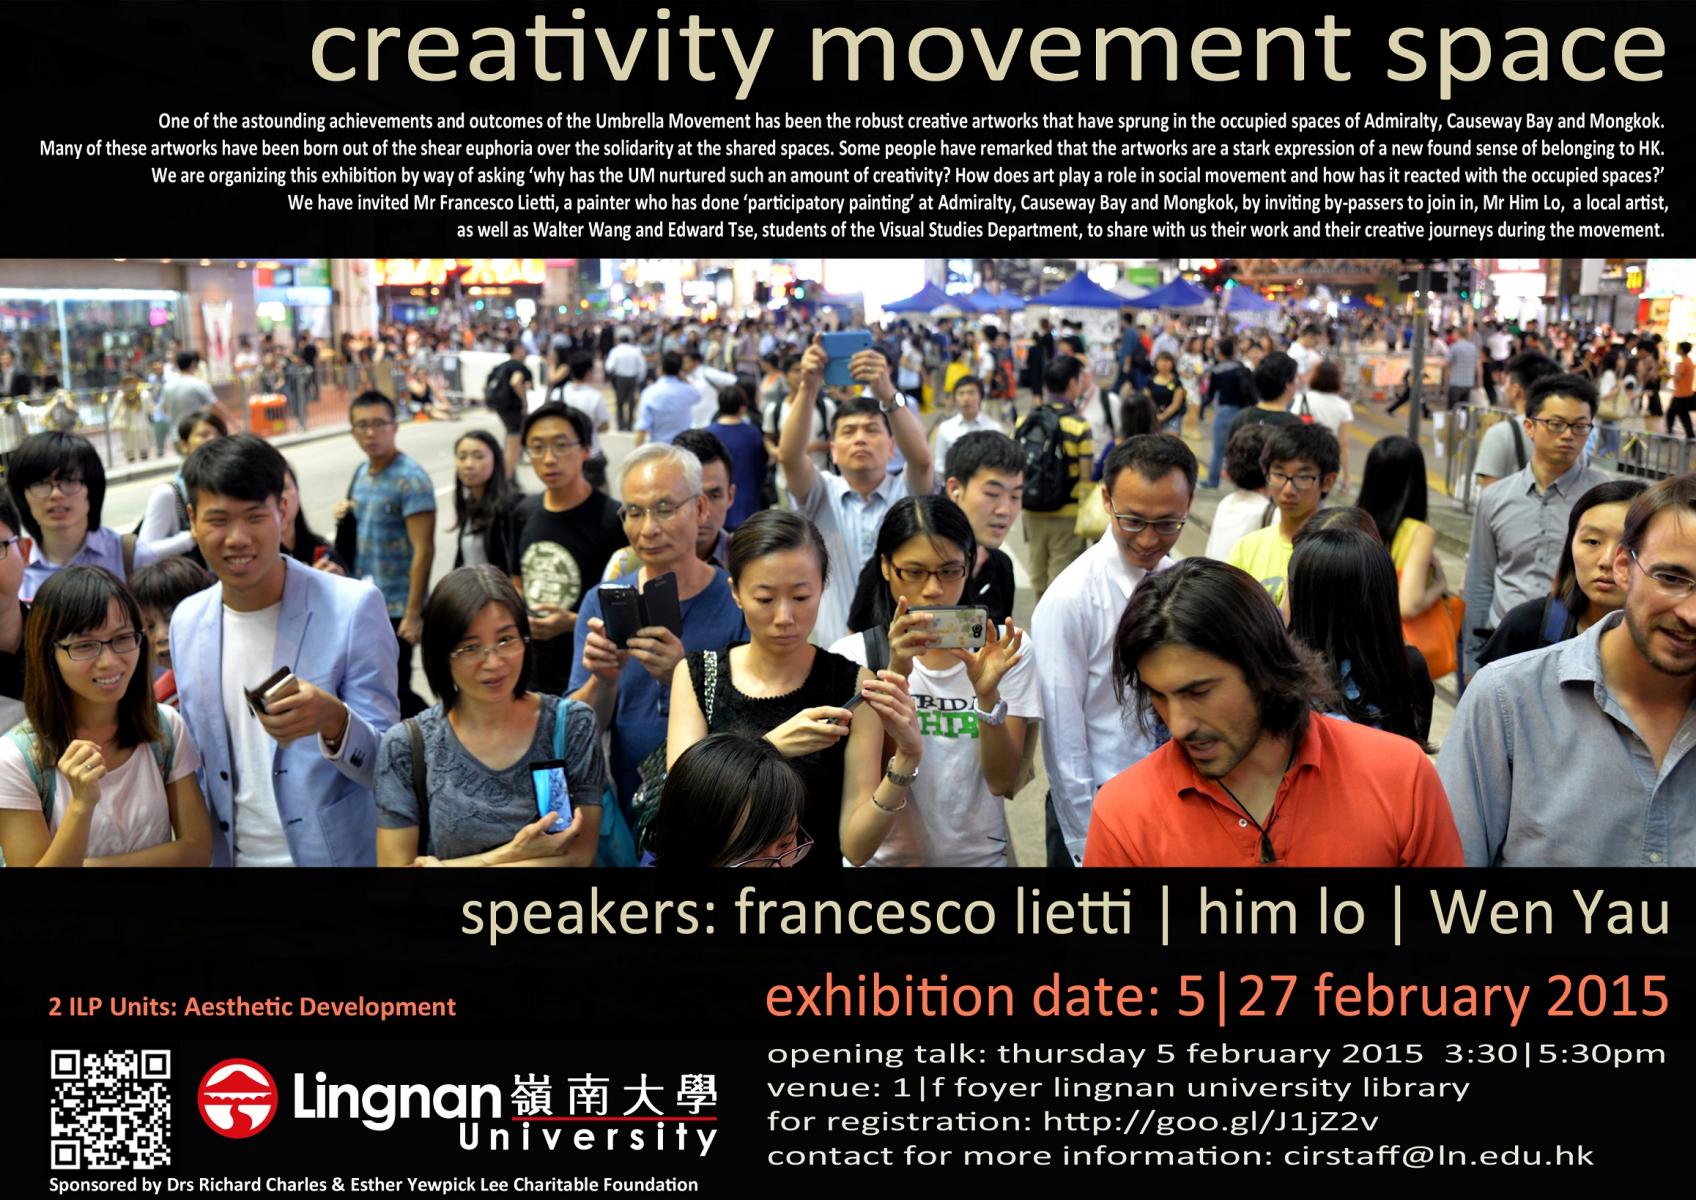 Opening Talk of "Creativity Movement Space" Exhibition